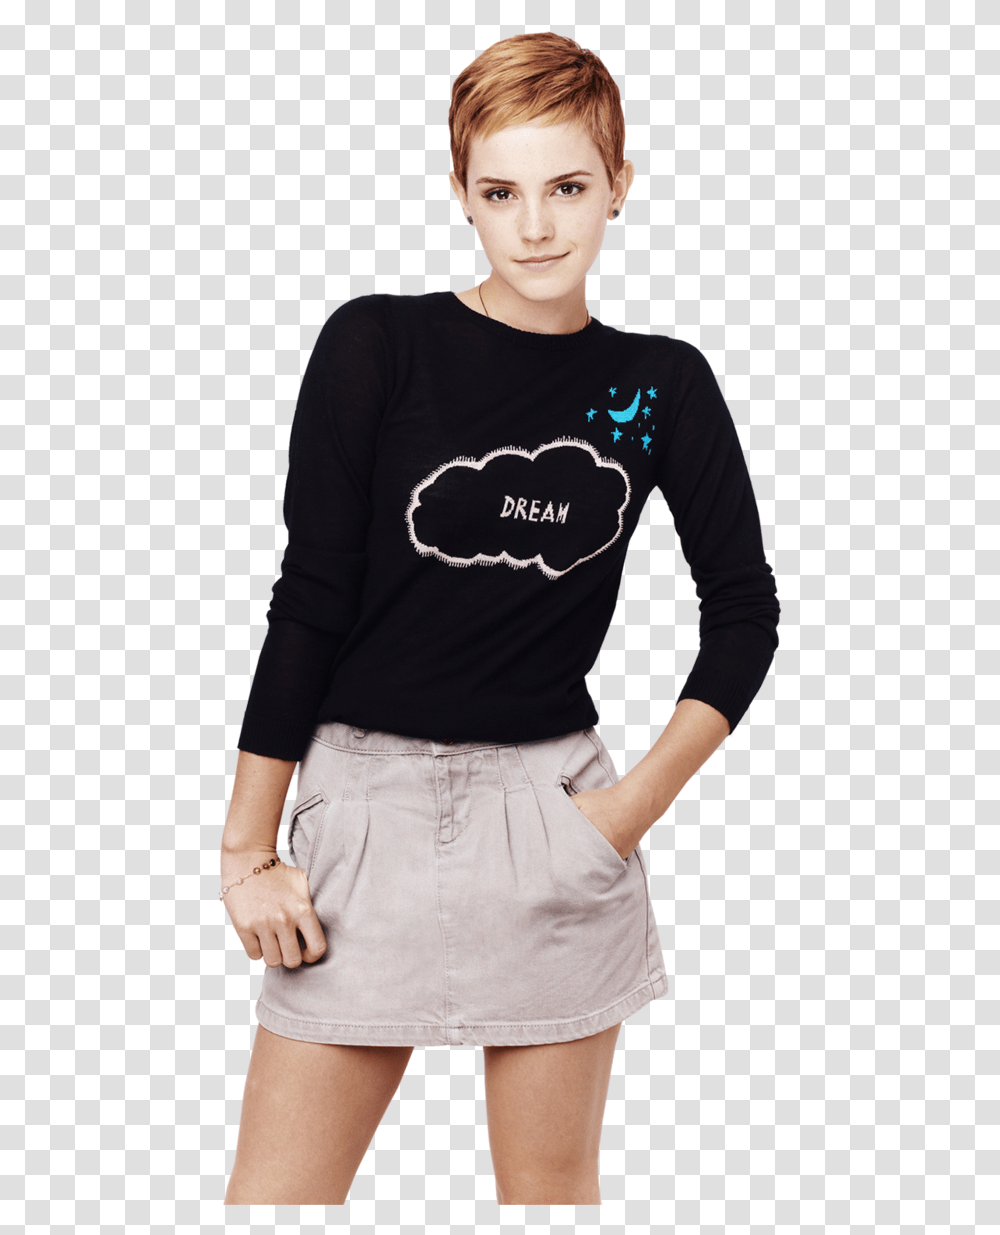 Emma Watson Hermione Granger Photo Shoot Actor Pixie Cut And Skirt, Apparel, Sleeve, Long Sleeve Transparent Png